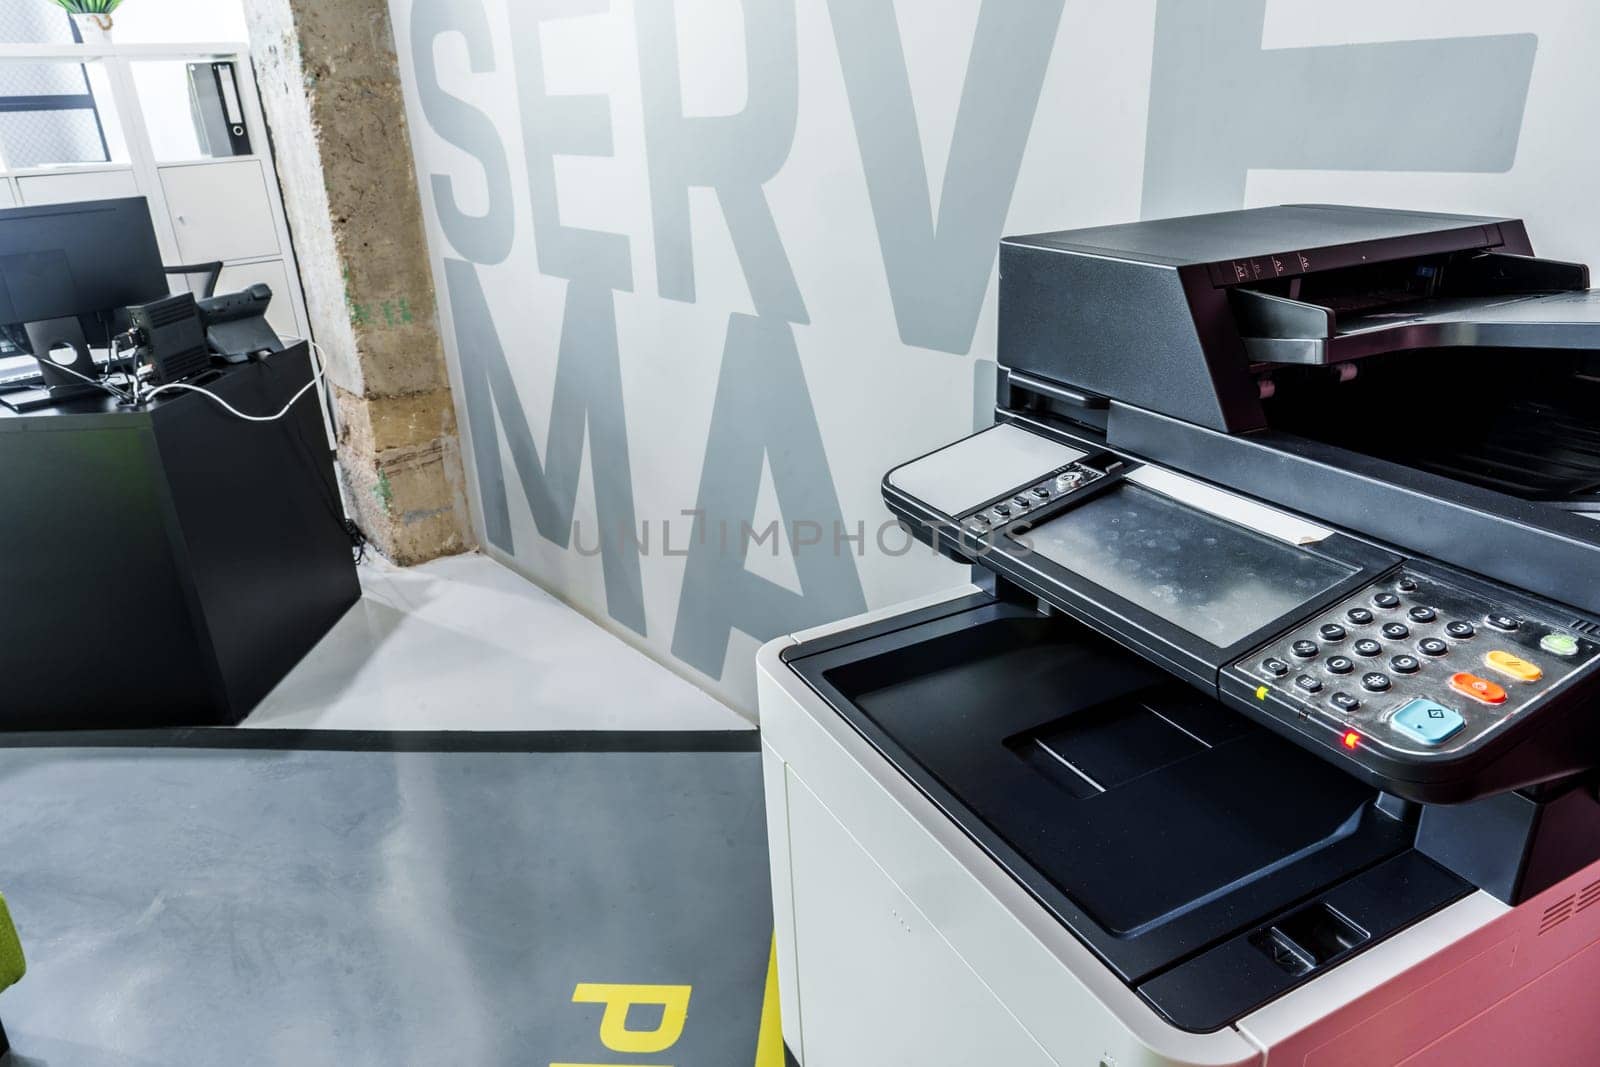 Multifunction printer equipment for scanning and copy paper in modern office